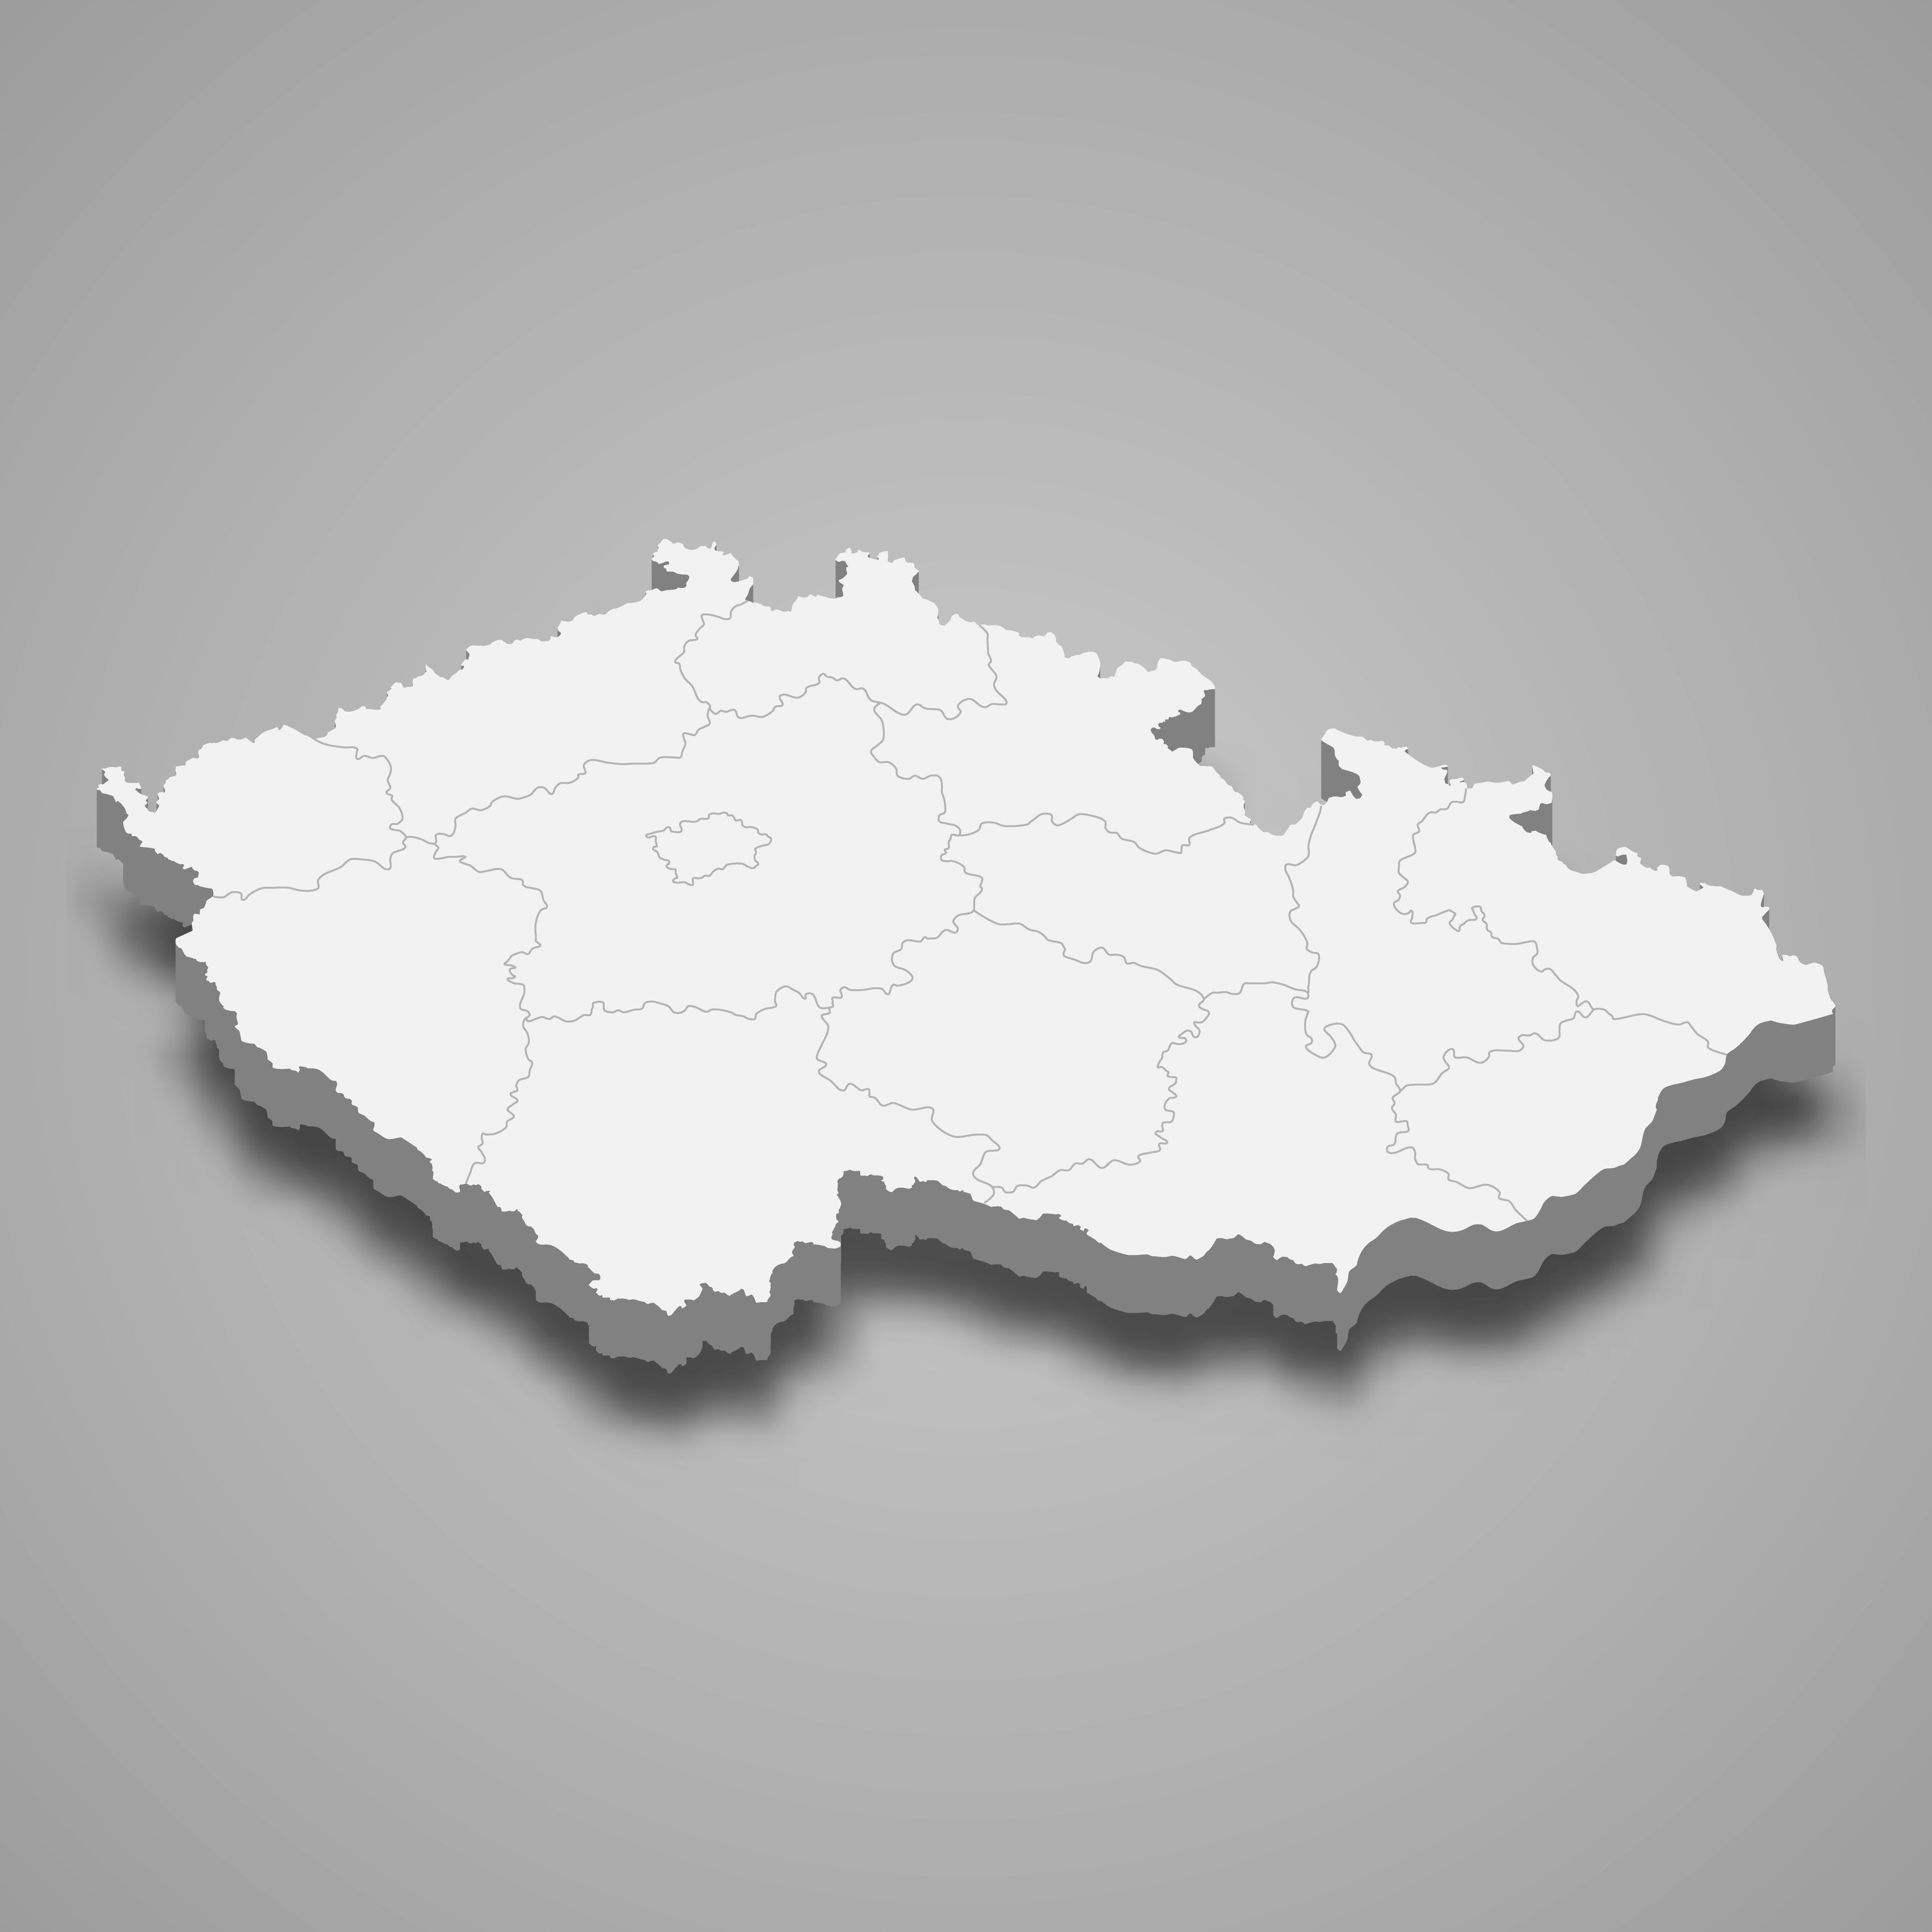 3d map of Czech Republic with borders of regions. 3d map with borders Template for your design